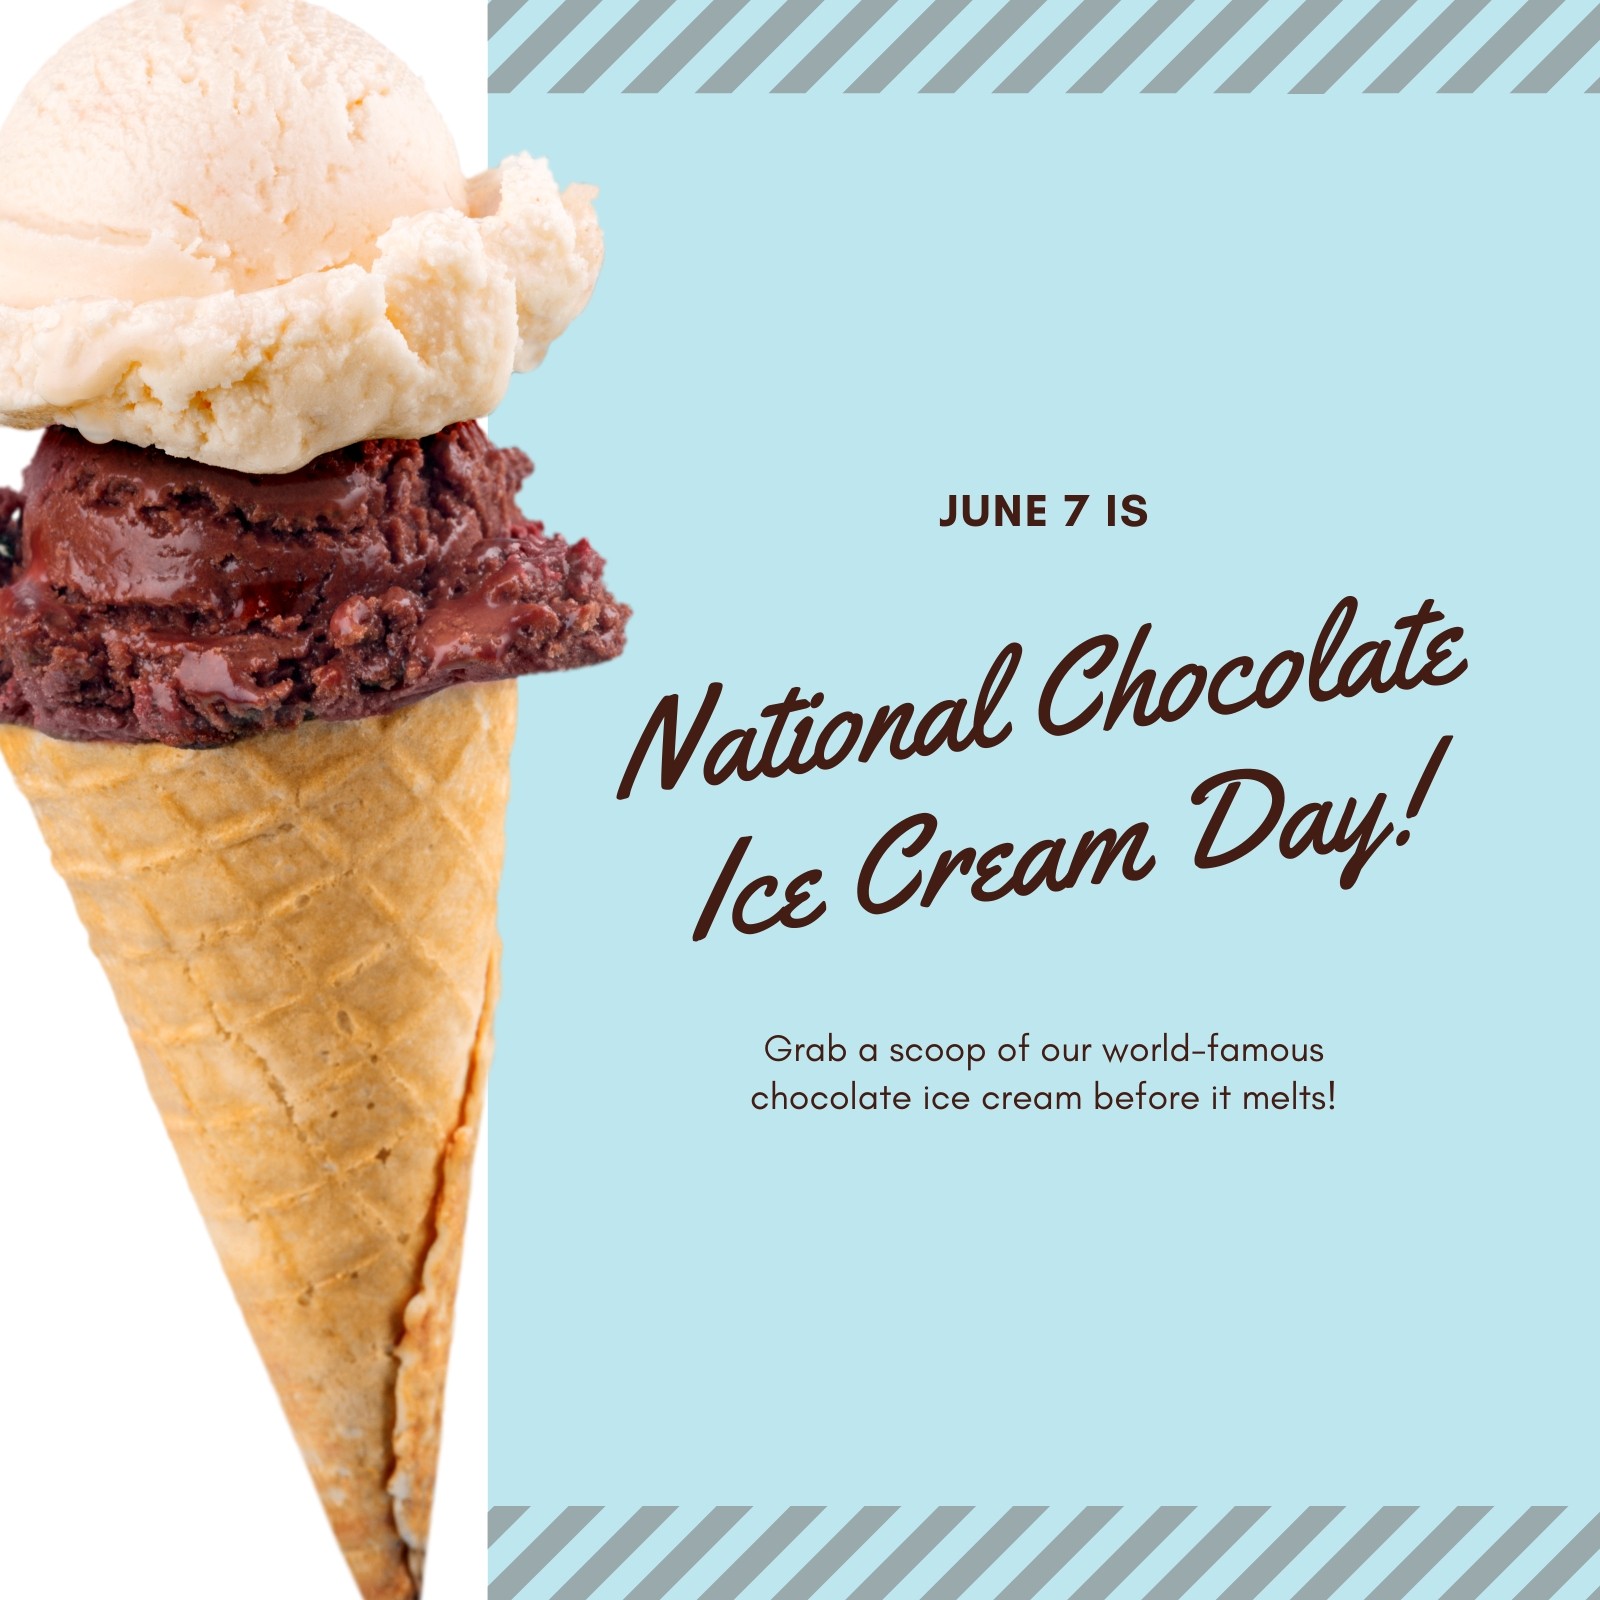 National Chocolate Ice Cream Day Best Event in The World